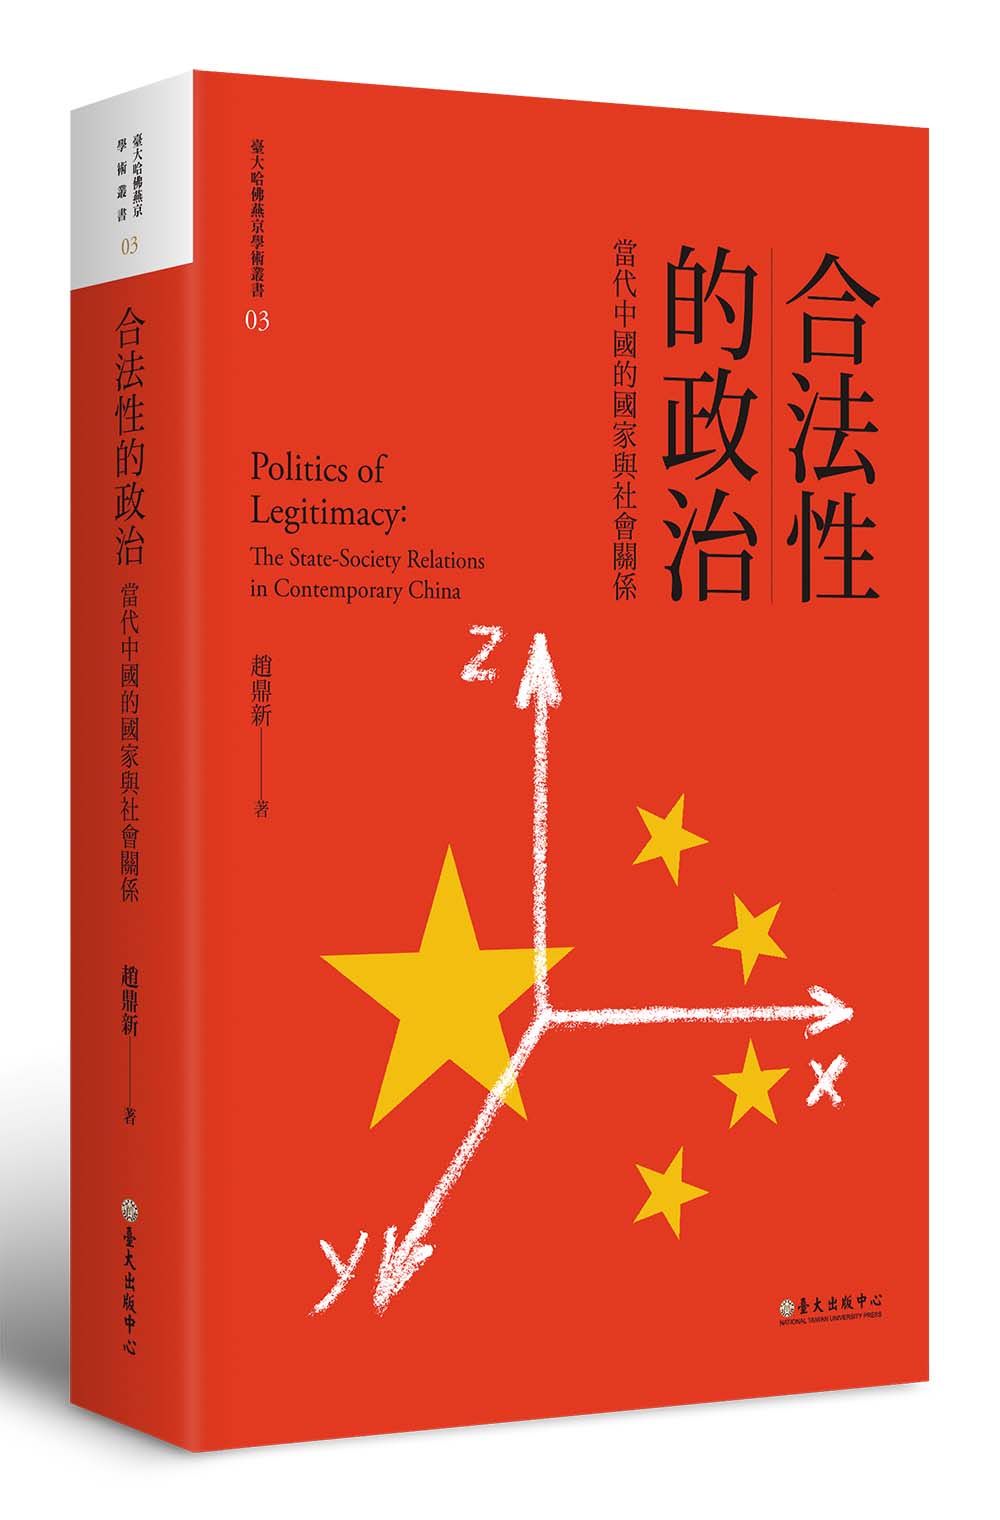 Politics of Legitimacy: The State-Society Relations in Contemporary China(paperback)